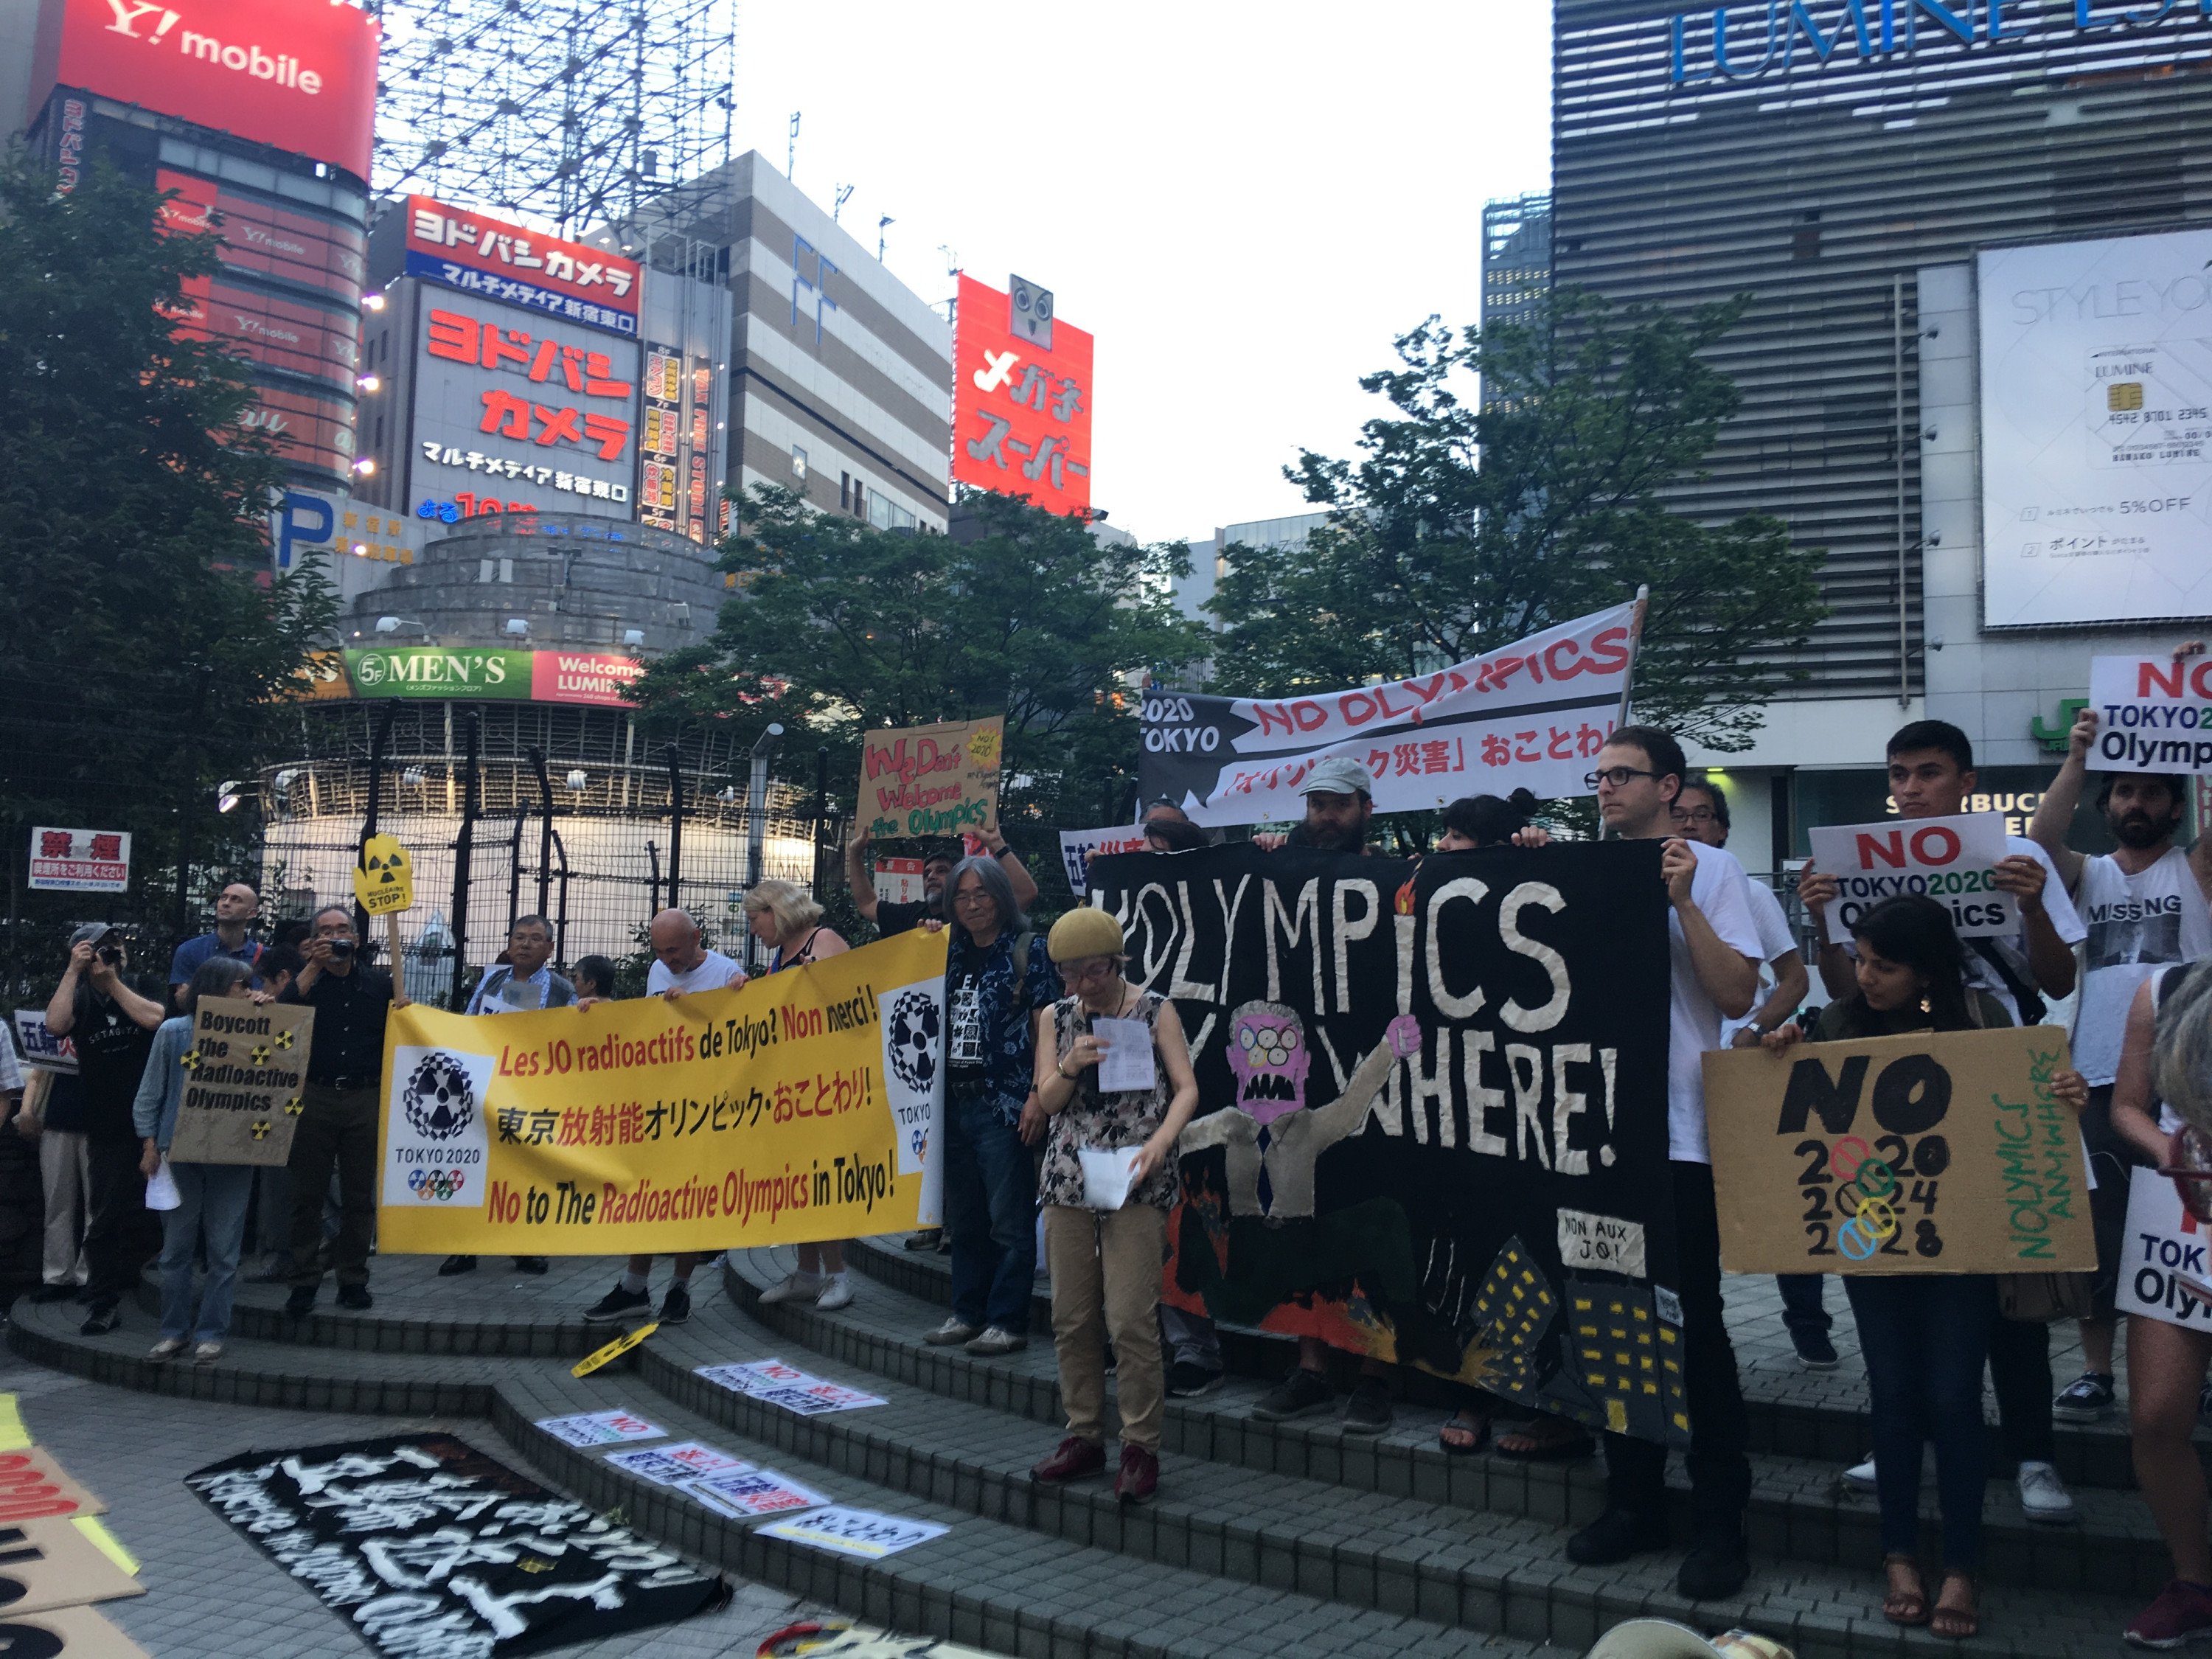 Anti-Olympic demonstration in Shinjuku, a ward in Tokyo. Still from the film <b><i>Olympic Halftime</i></b>